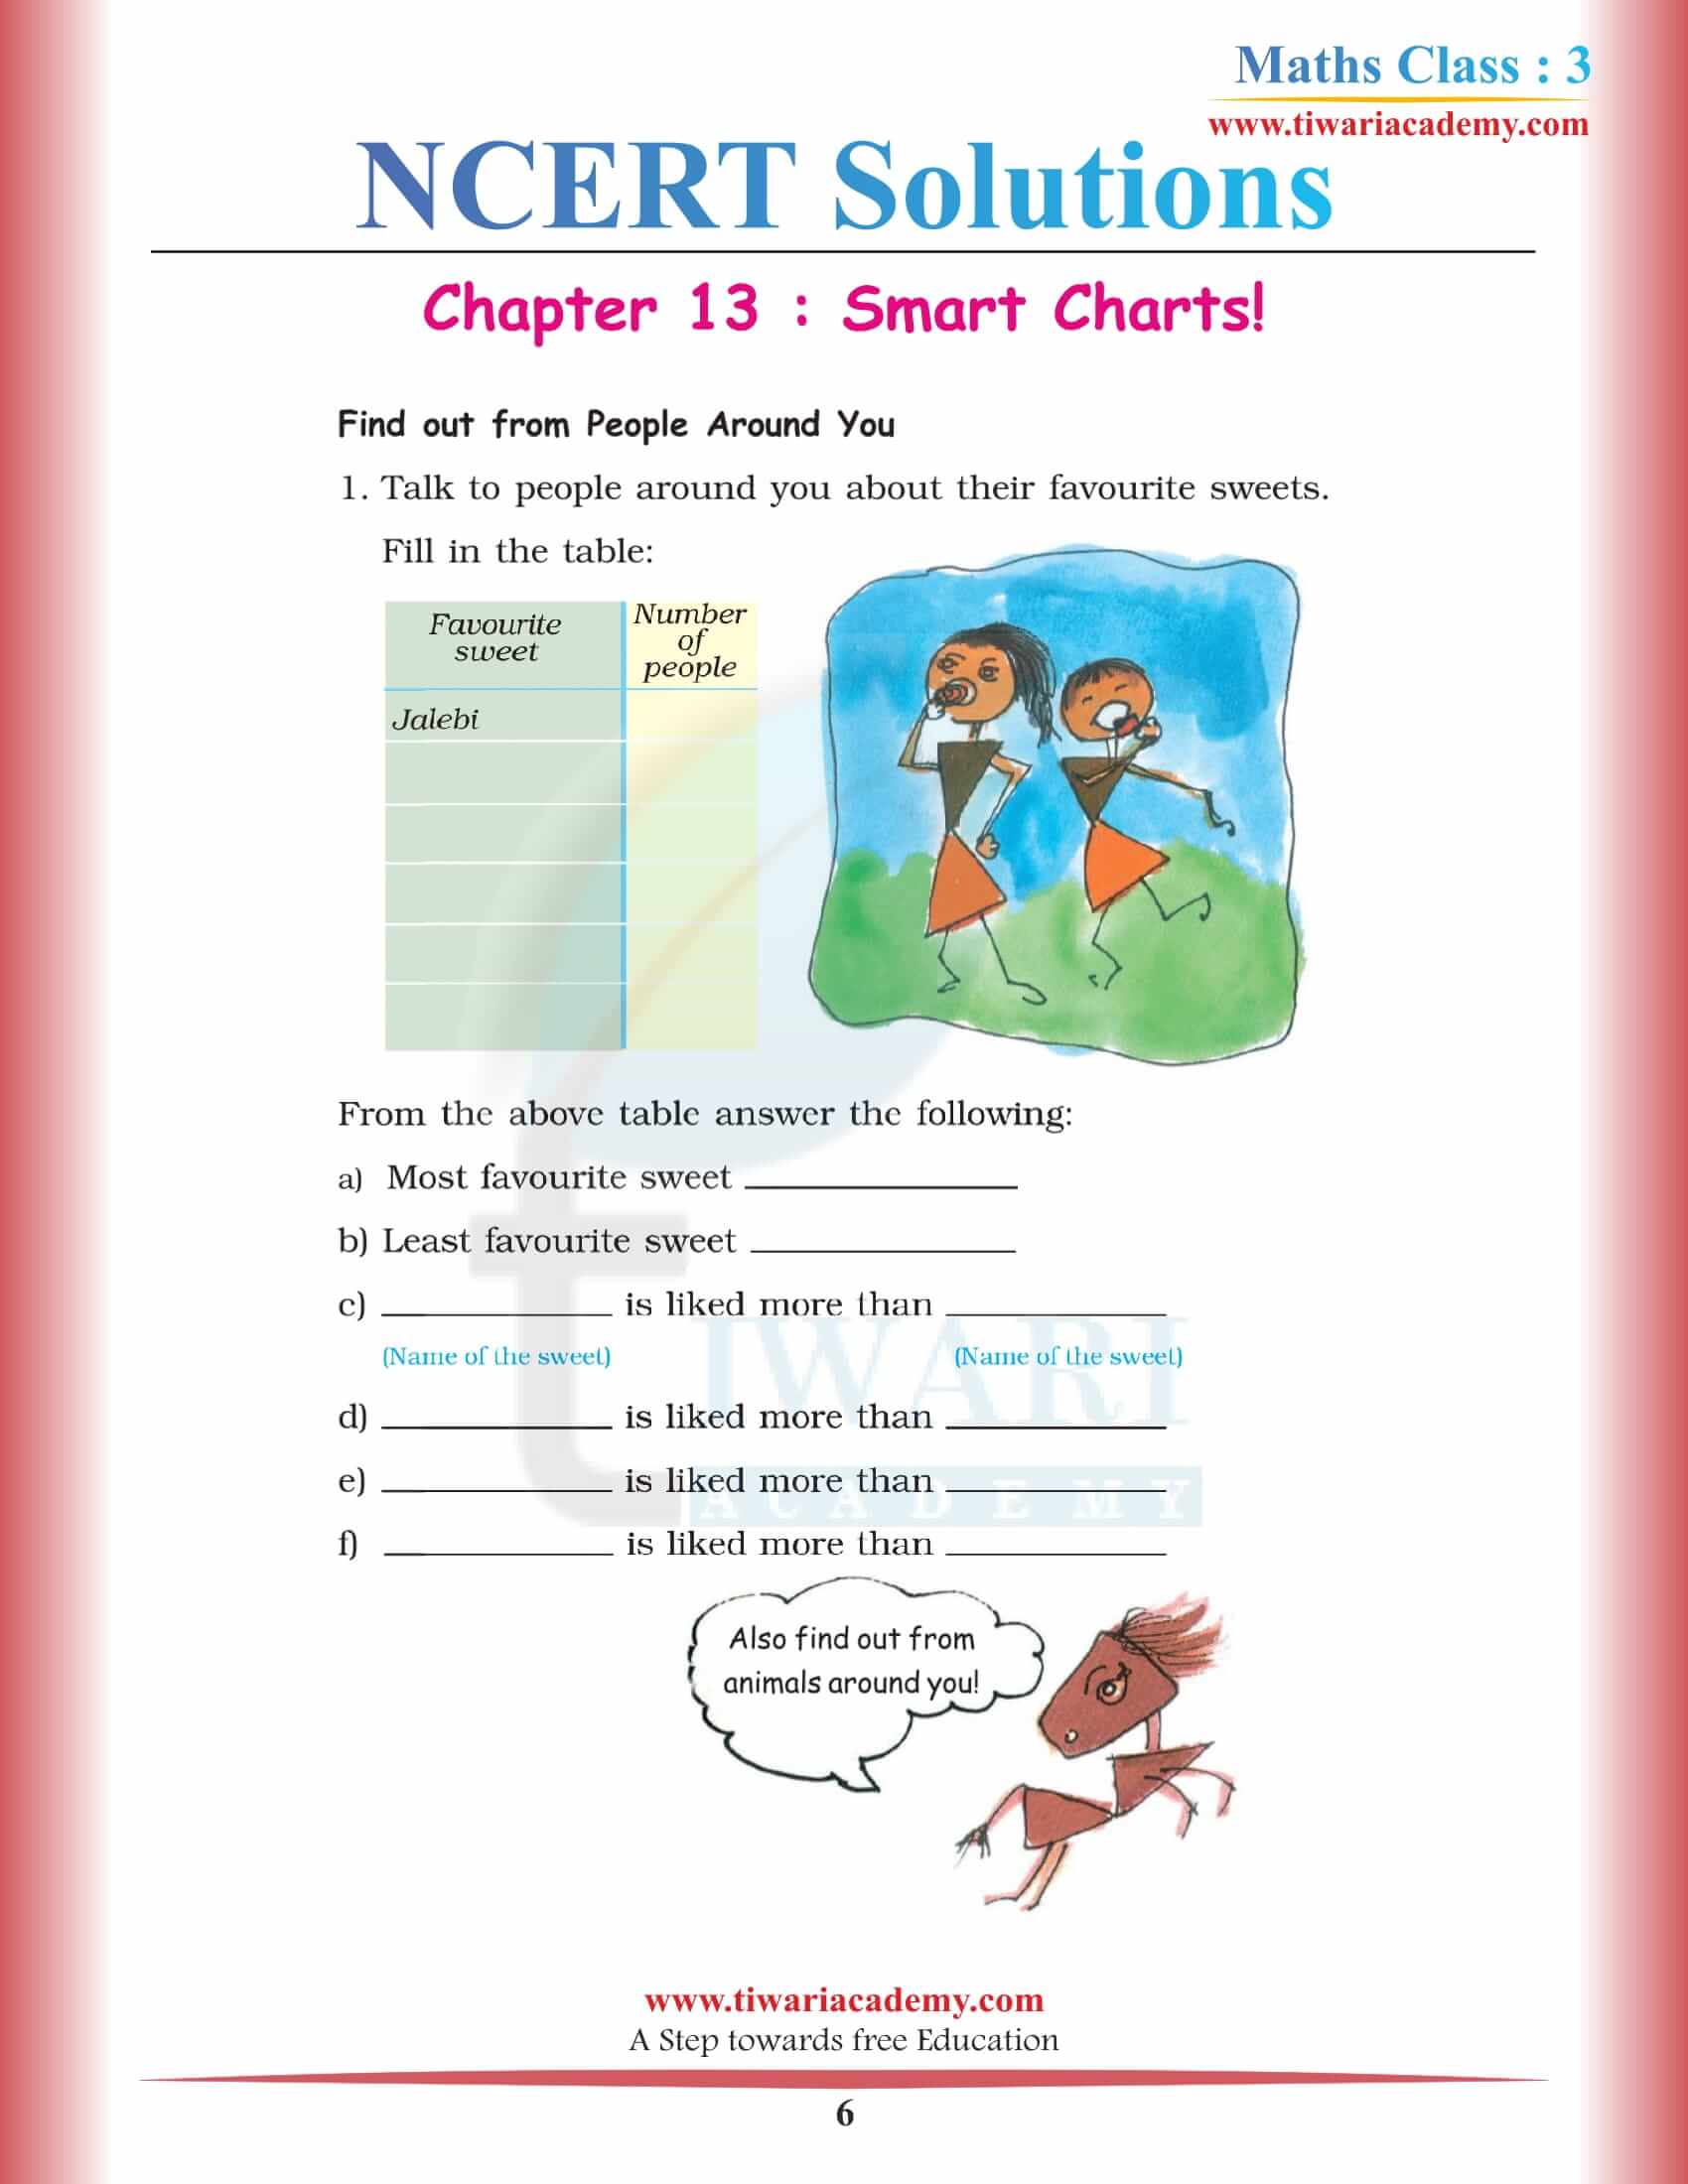 NCERT Solutions for Class 3 Maths Chapter 13 free download